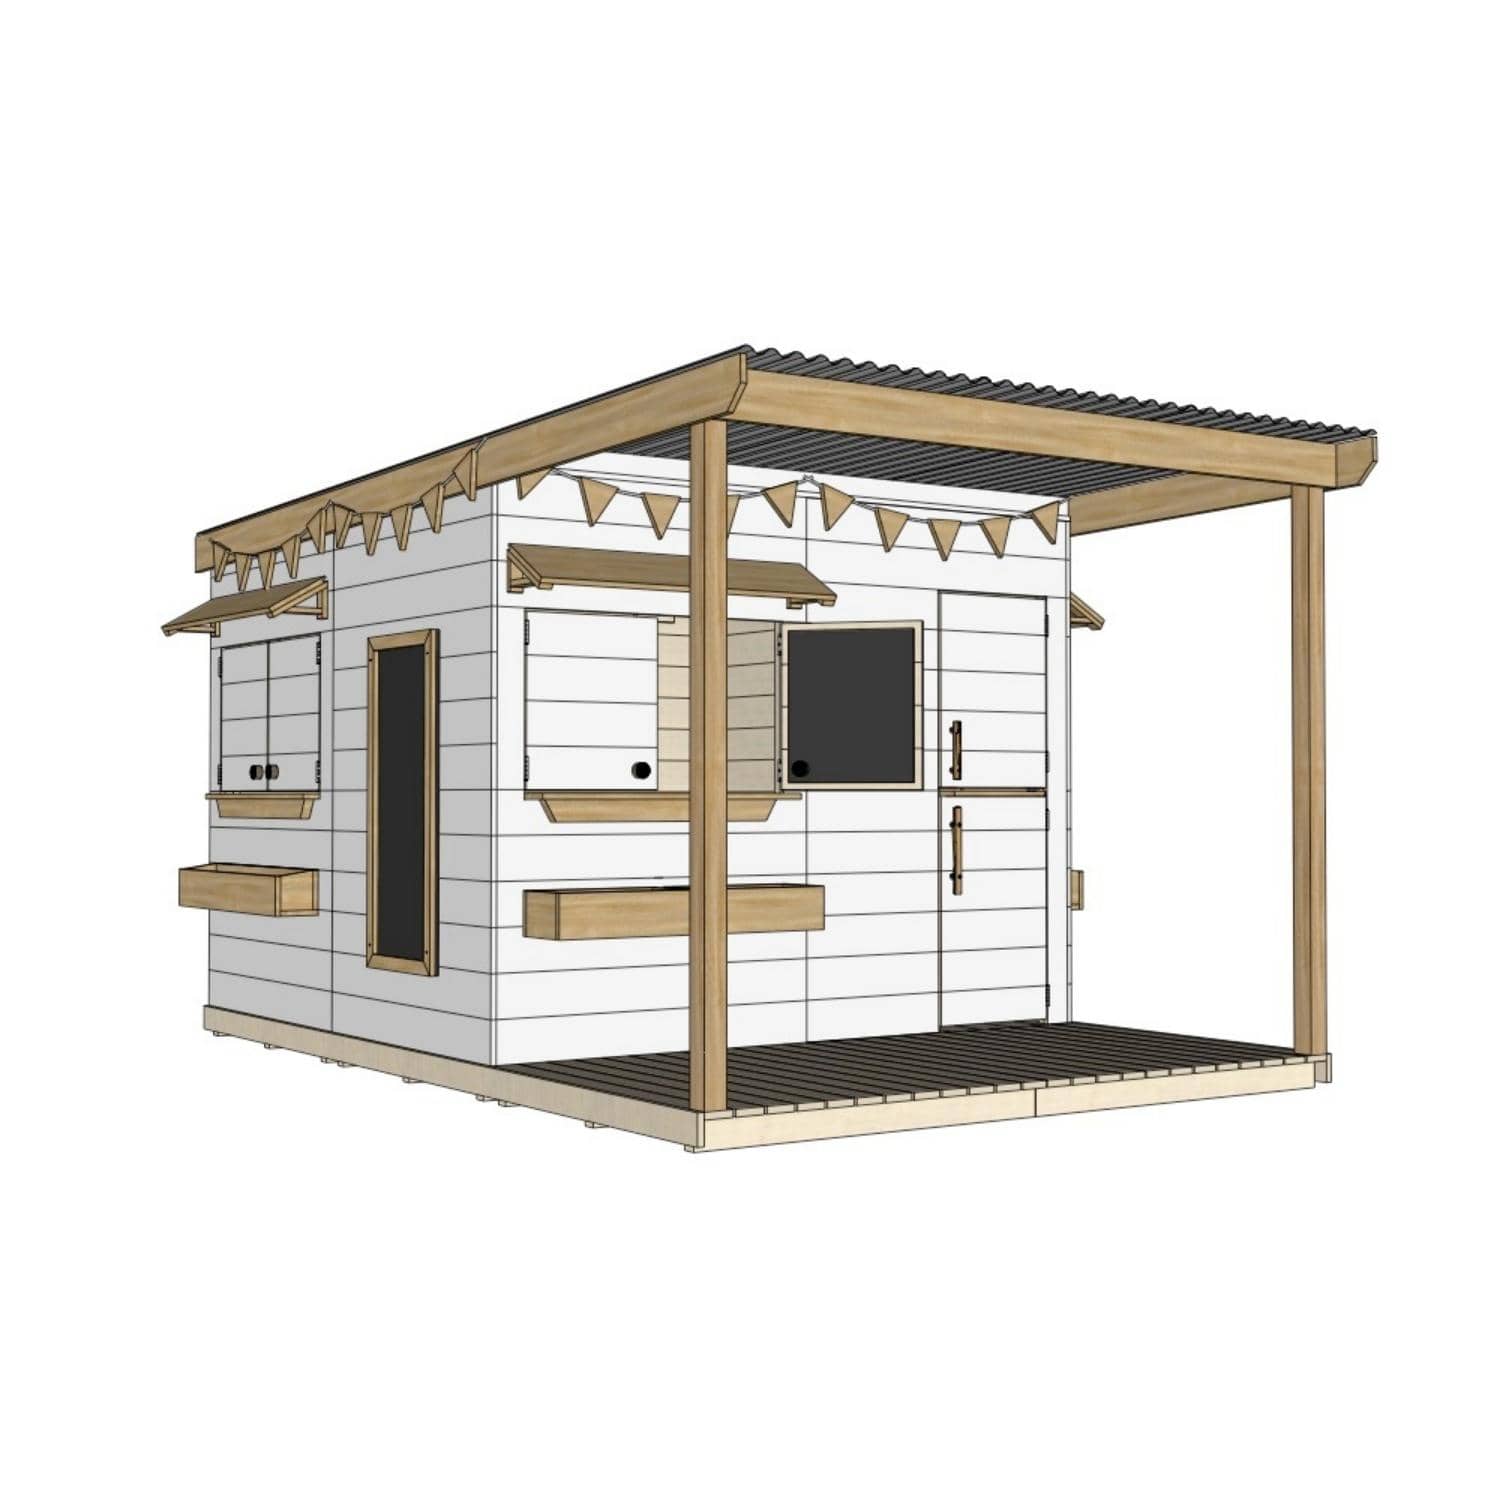 Painted timber extended height cubby house with front verandah and deck for family gardens large square size with accessories